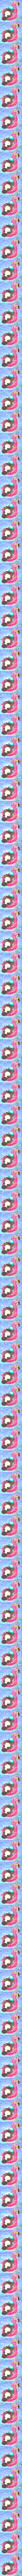 Summer Platypus collection image